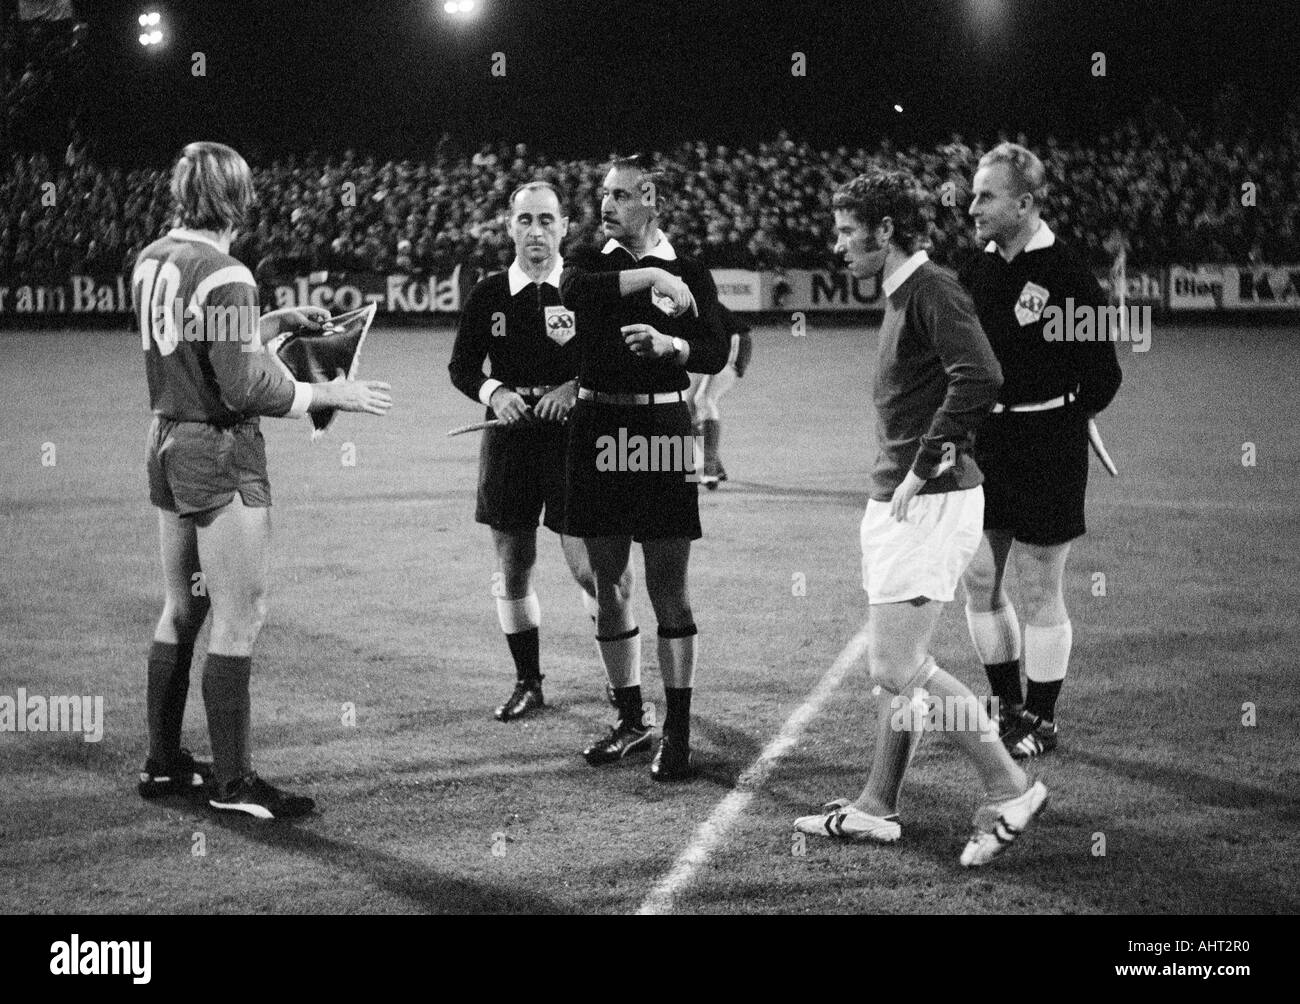 football, European Cup, eighth final, 1970/1971, Borussia Moenchengladbach versus FC Everton 1:1, Boekelberg Stadium in Moenchengladbach, toss-up and welcome, referee Kruaschwili (3.f.l.) from the USSR and assistants, team captains Guenter Netzer (MG) lef Stock Photo